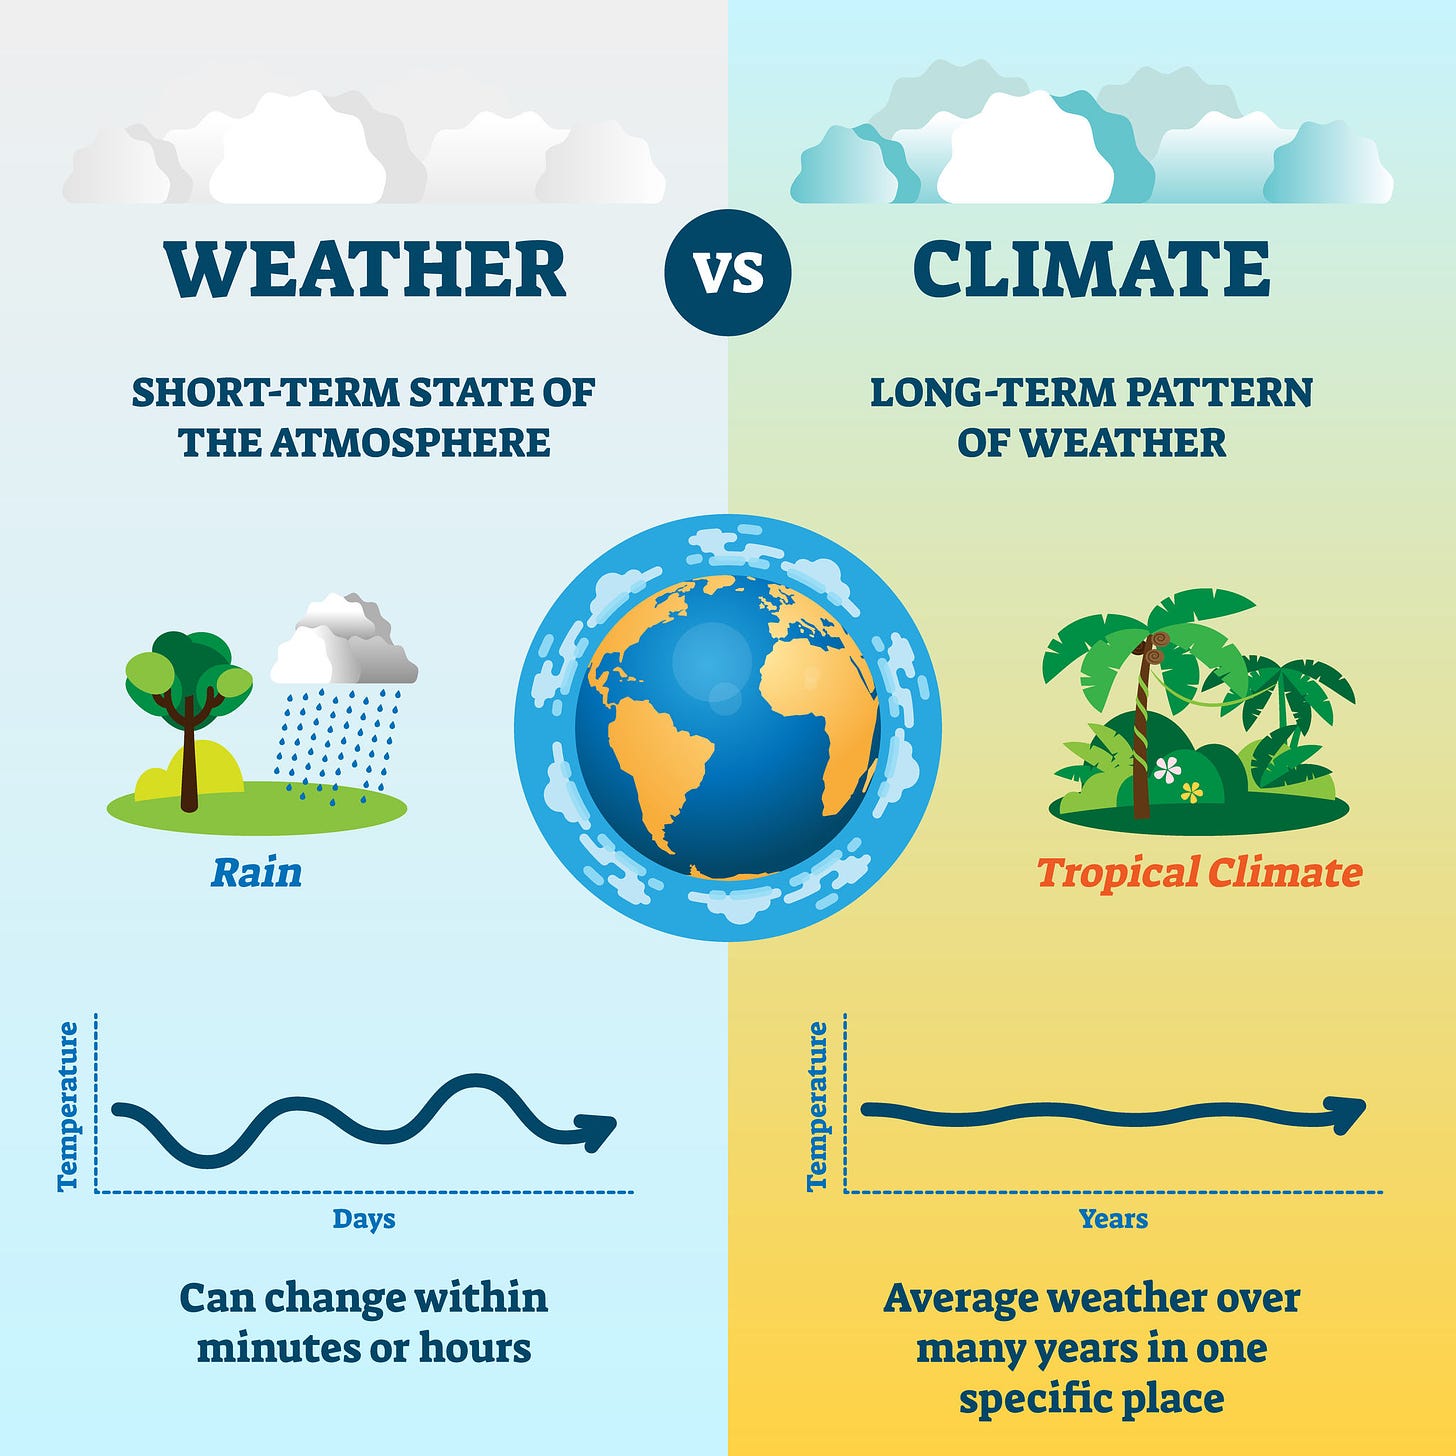 What is the difference between Climate and weather?